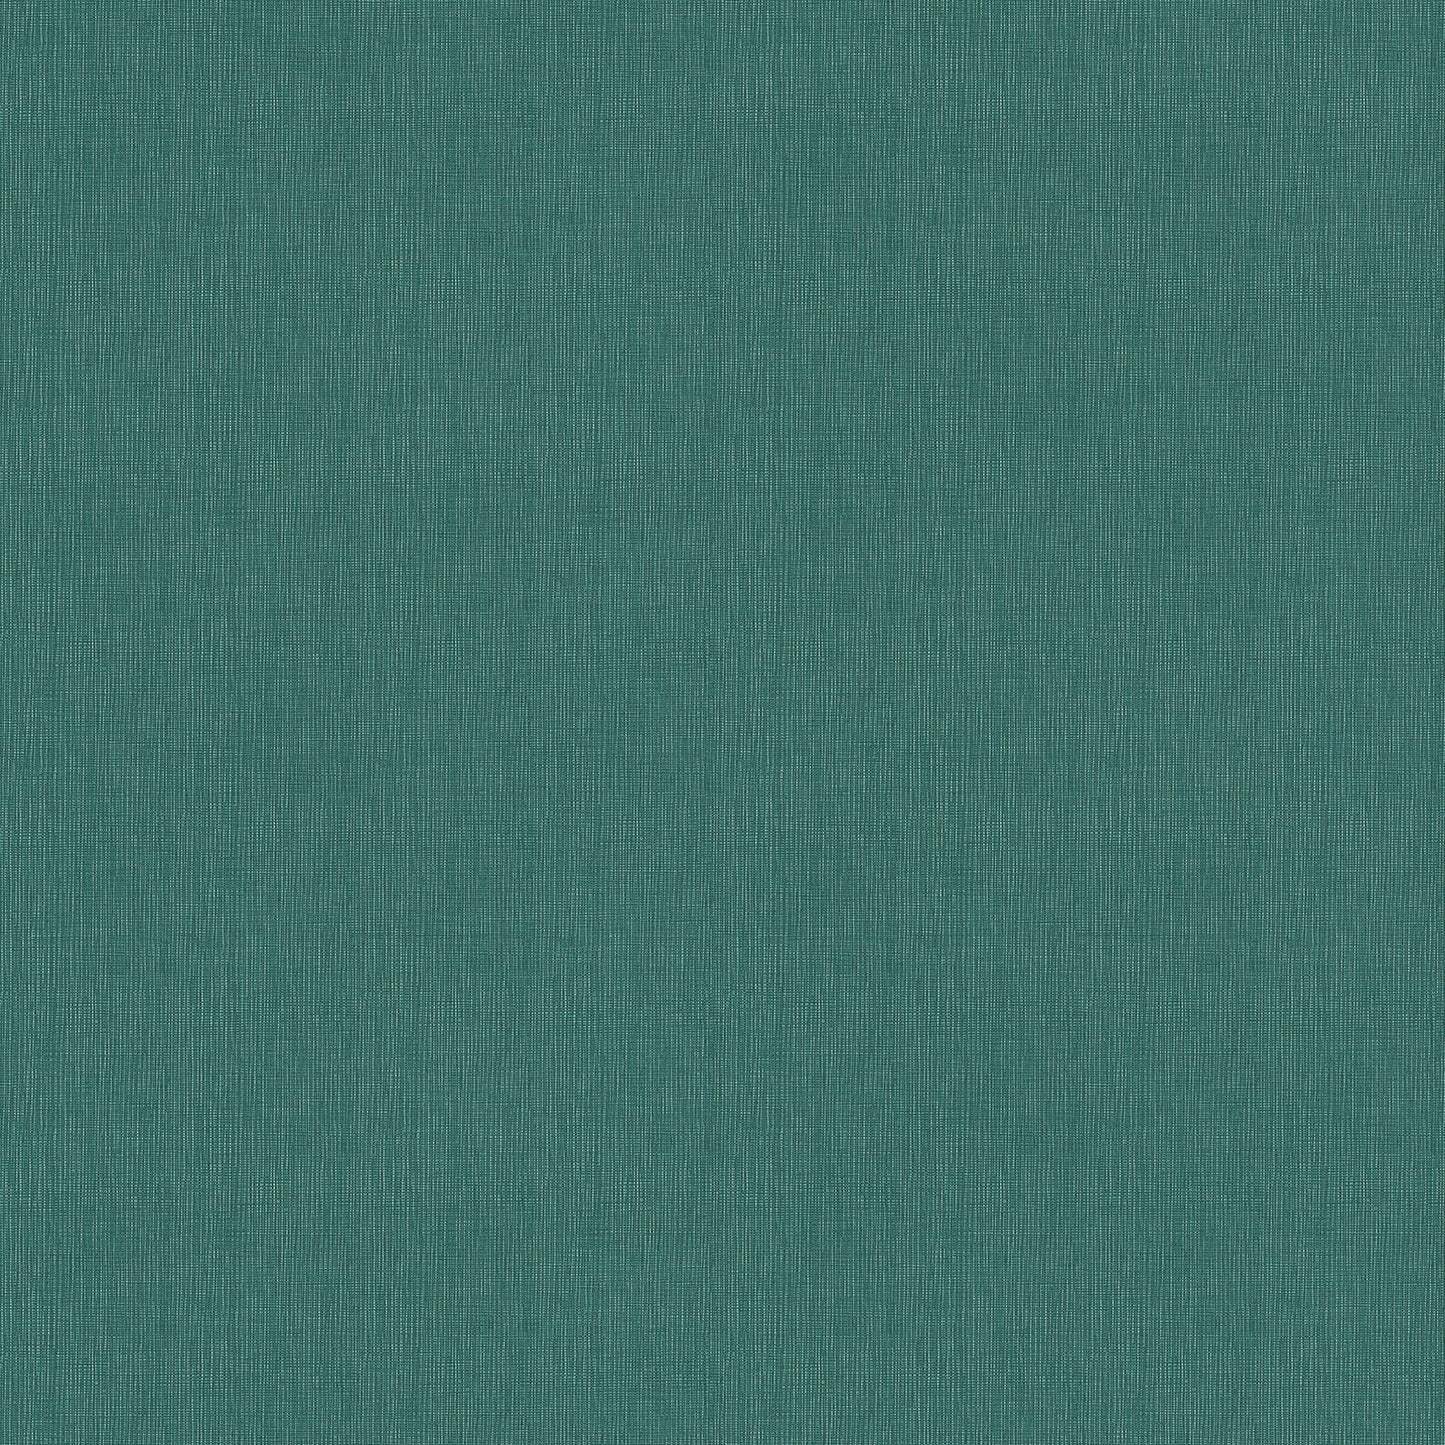 Acquire 4015-36977-1 Beyond Textures Seaton Sea Green Linen Texture Sea Green by Advantage